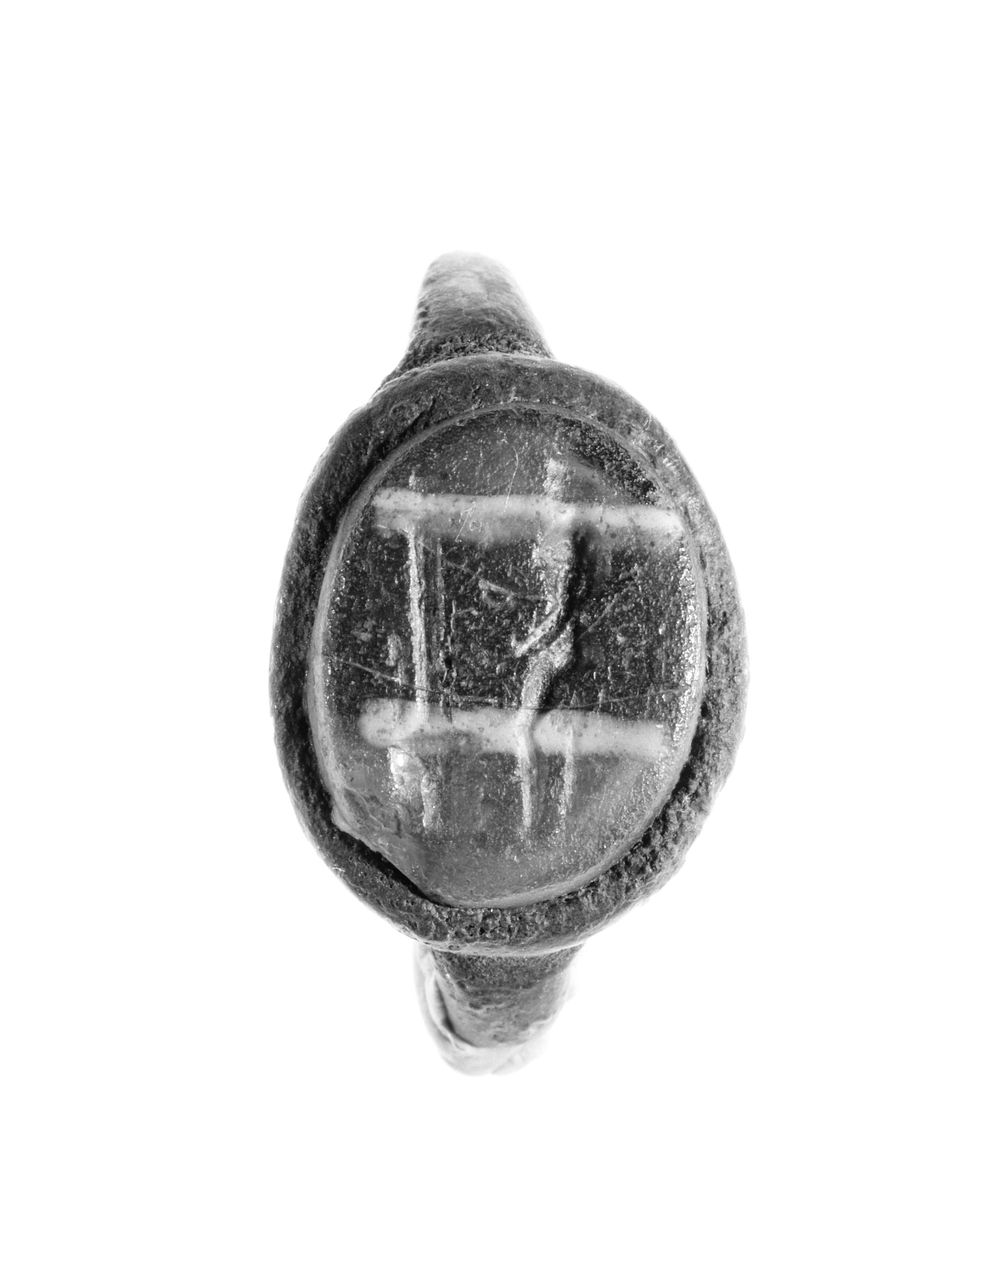 Two-Piece Cast Gem Set Into a Fragmentary Ring